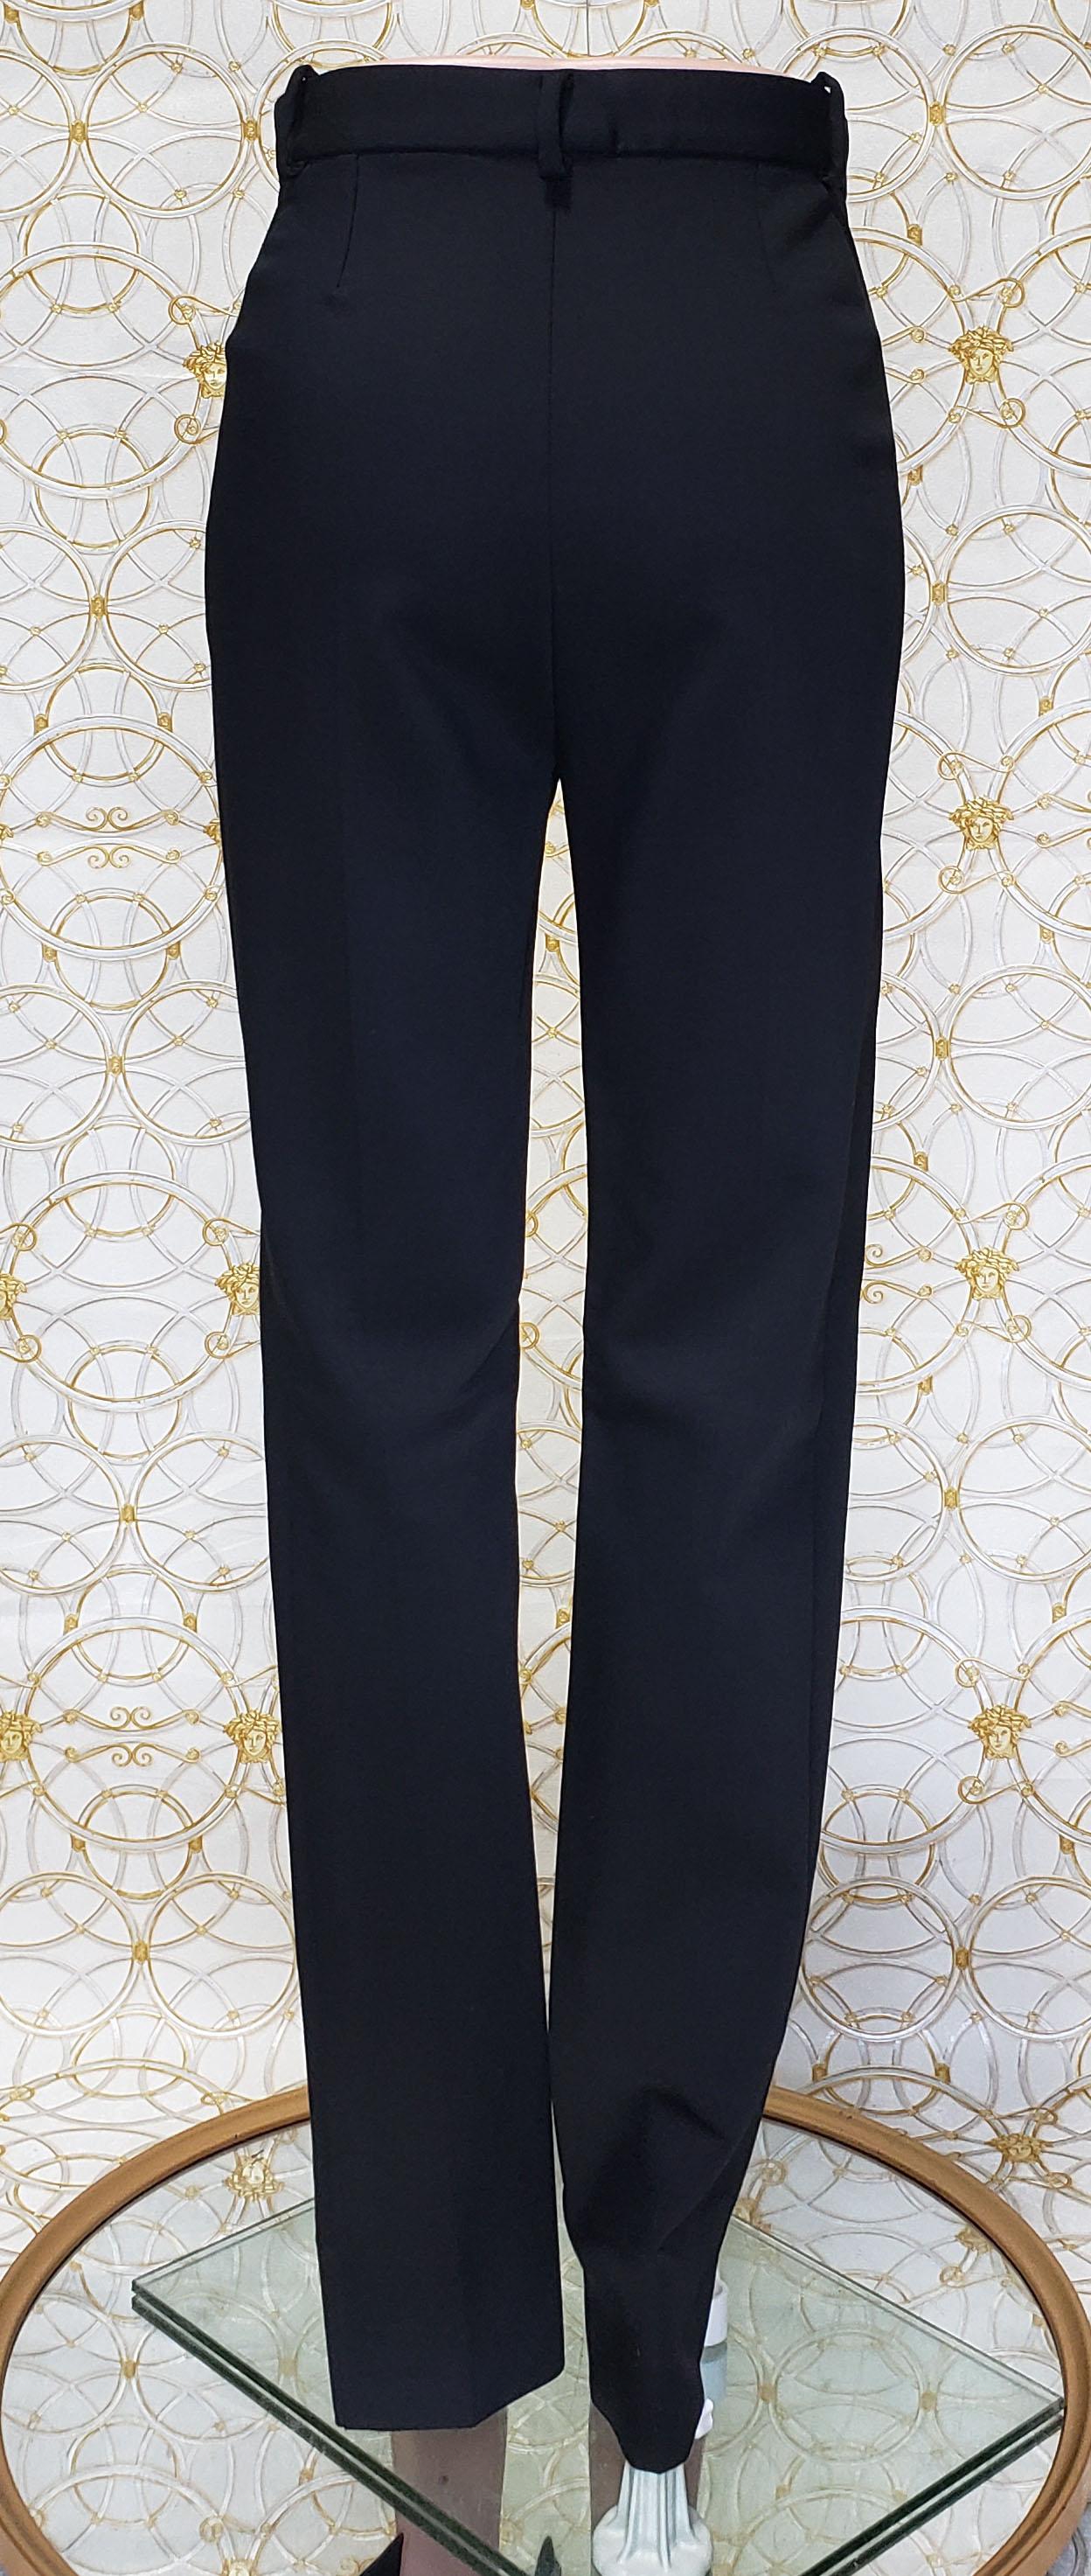 F/W15 Look #48 VERSACE BLACK CLASSIC WOOL PANTS size 38 - 4 In New Condition For Sale In Montgomery, TX